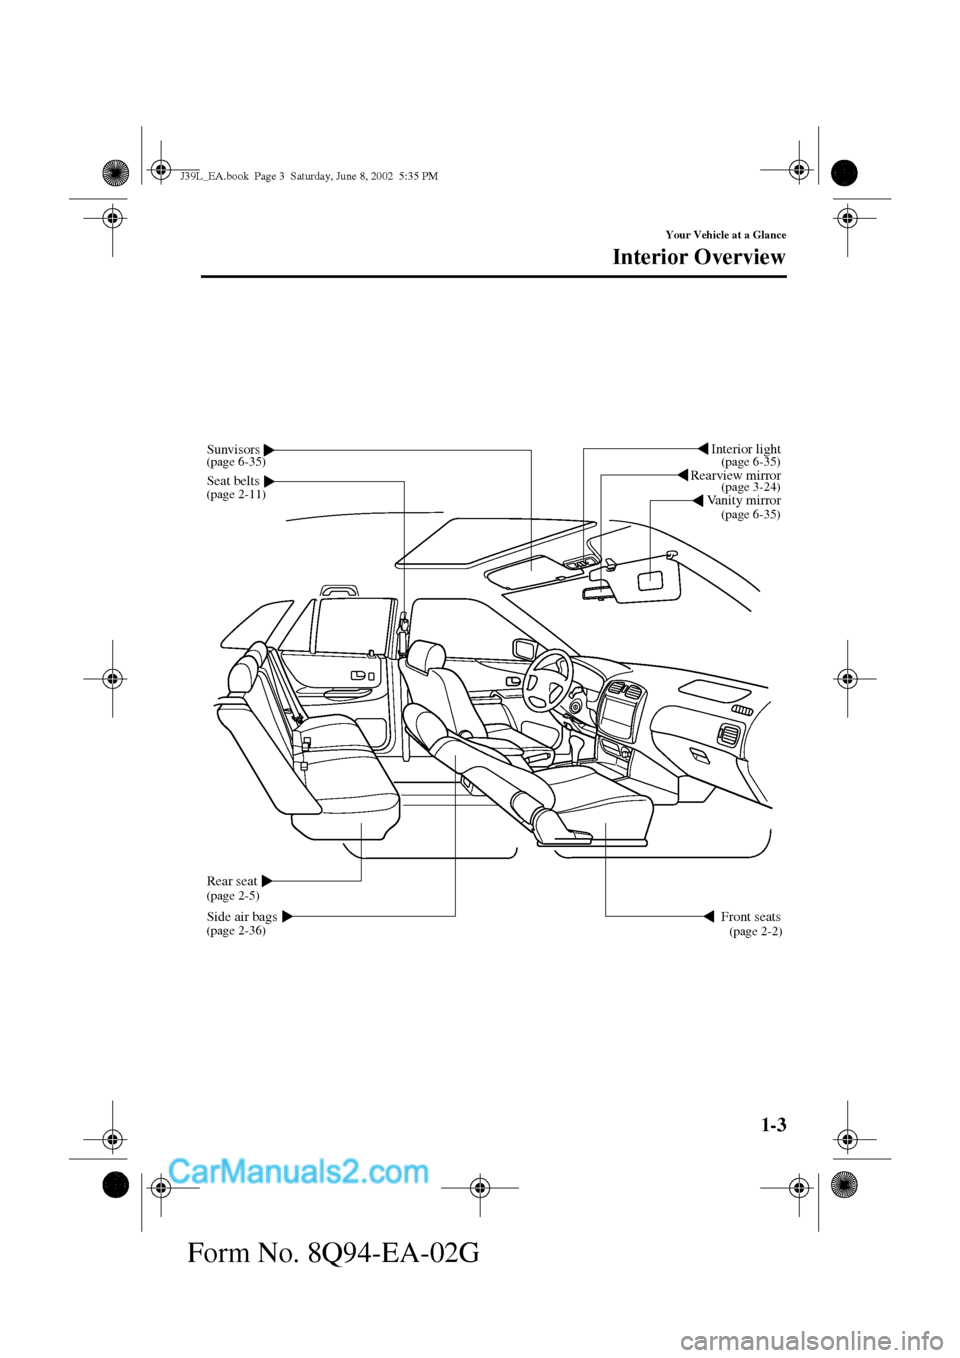 MAZDA MODEL PROTÉGÉ 2003  Owners Manual (in English) 1-3
Your Vehicle at a Glance
Form No. 8Q94-EA-02G
Interior Overview
Vanity mirror
Rearview mirror
Seat belts
Interior lightSunvisors
Front seatsSide air bags
Rear seat
(page 6-35)
(page 2-11)
(page 2-